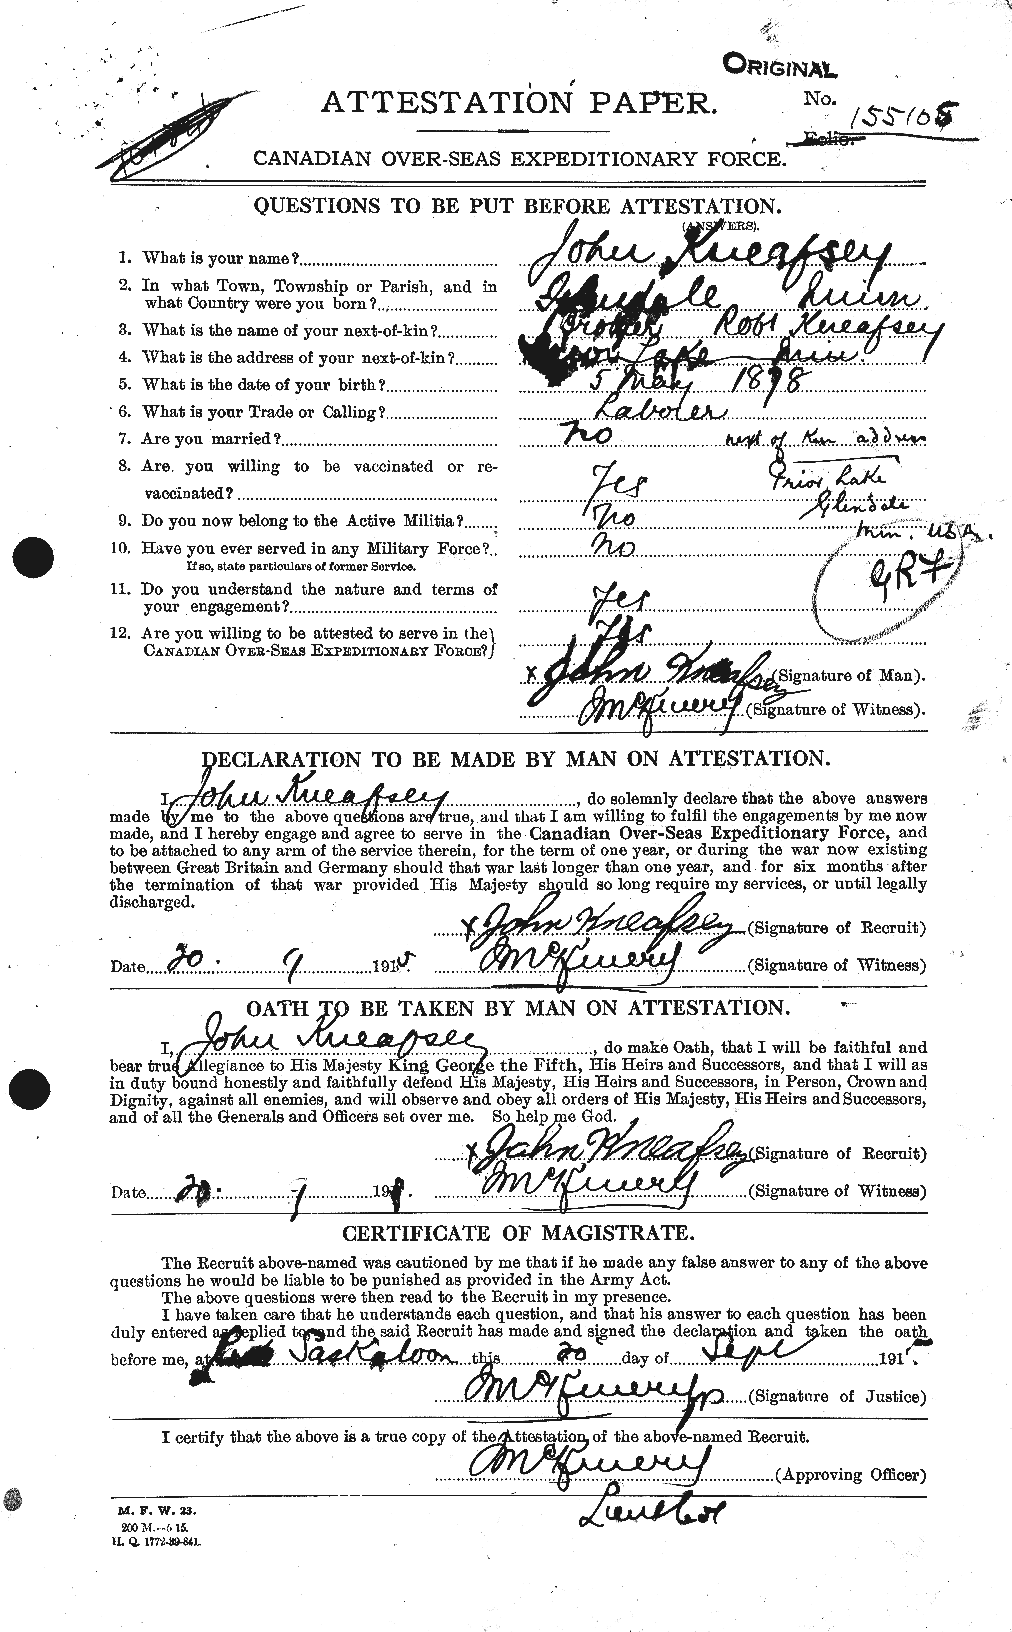 Personnel Records of the First World War - CEF 435882a